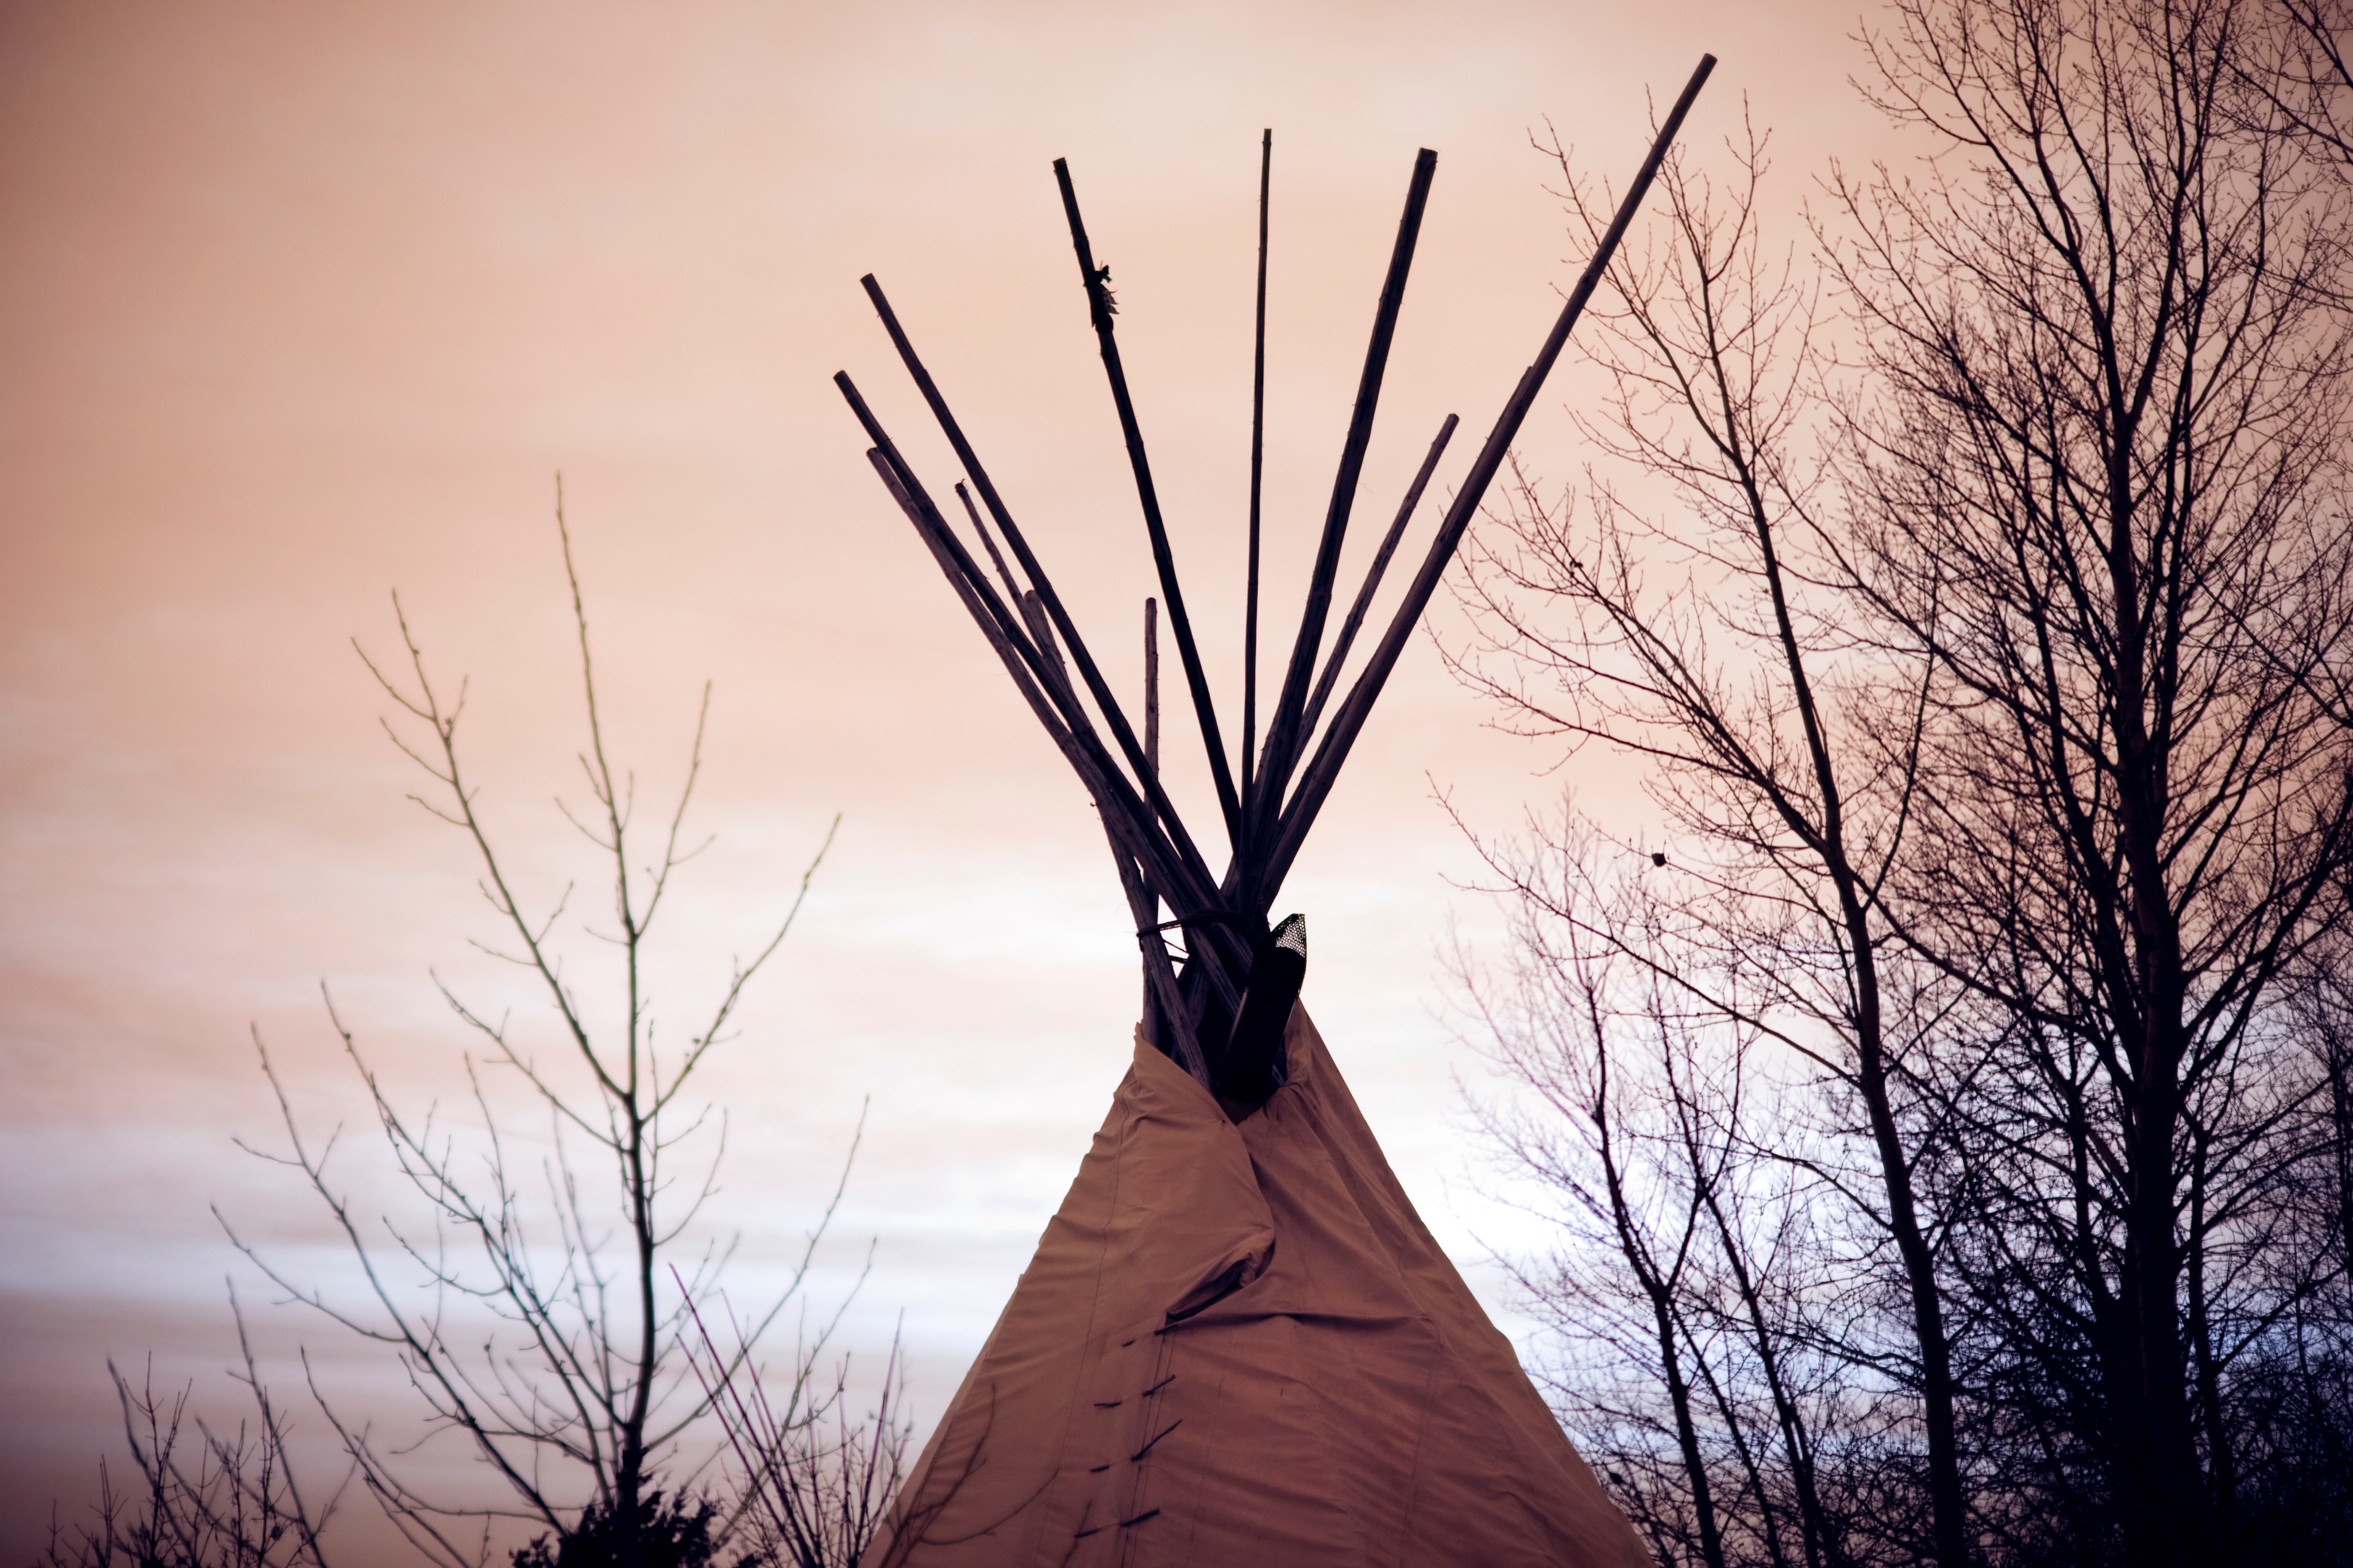 Tied seven times on top, each time represents the seven fires; the opening of the tipi always faces the East (sunrise). Photo credit: Natalie Escobedo